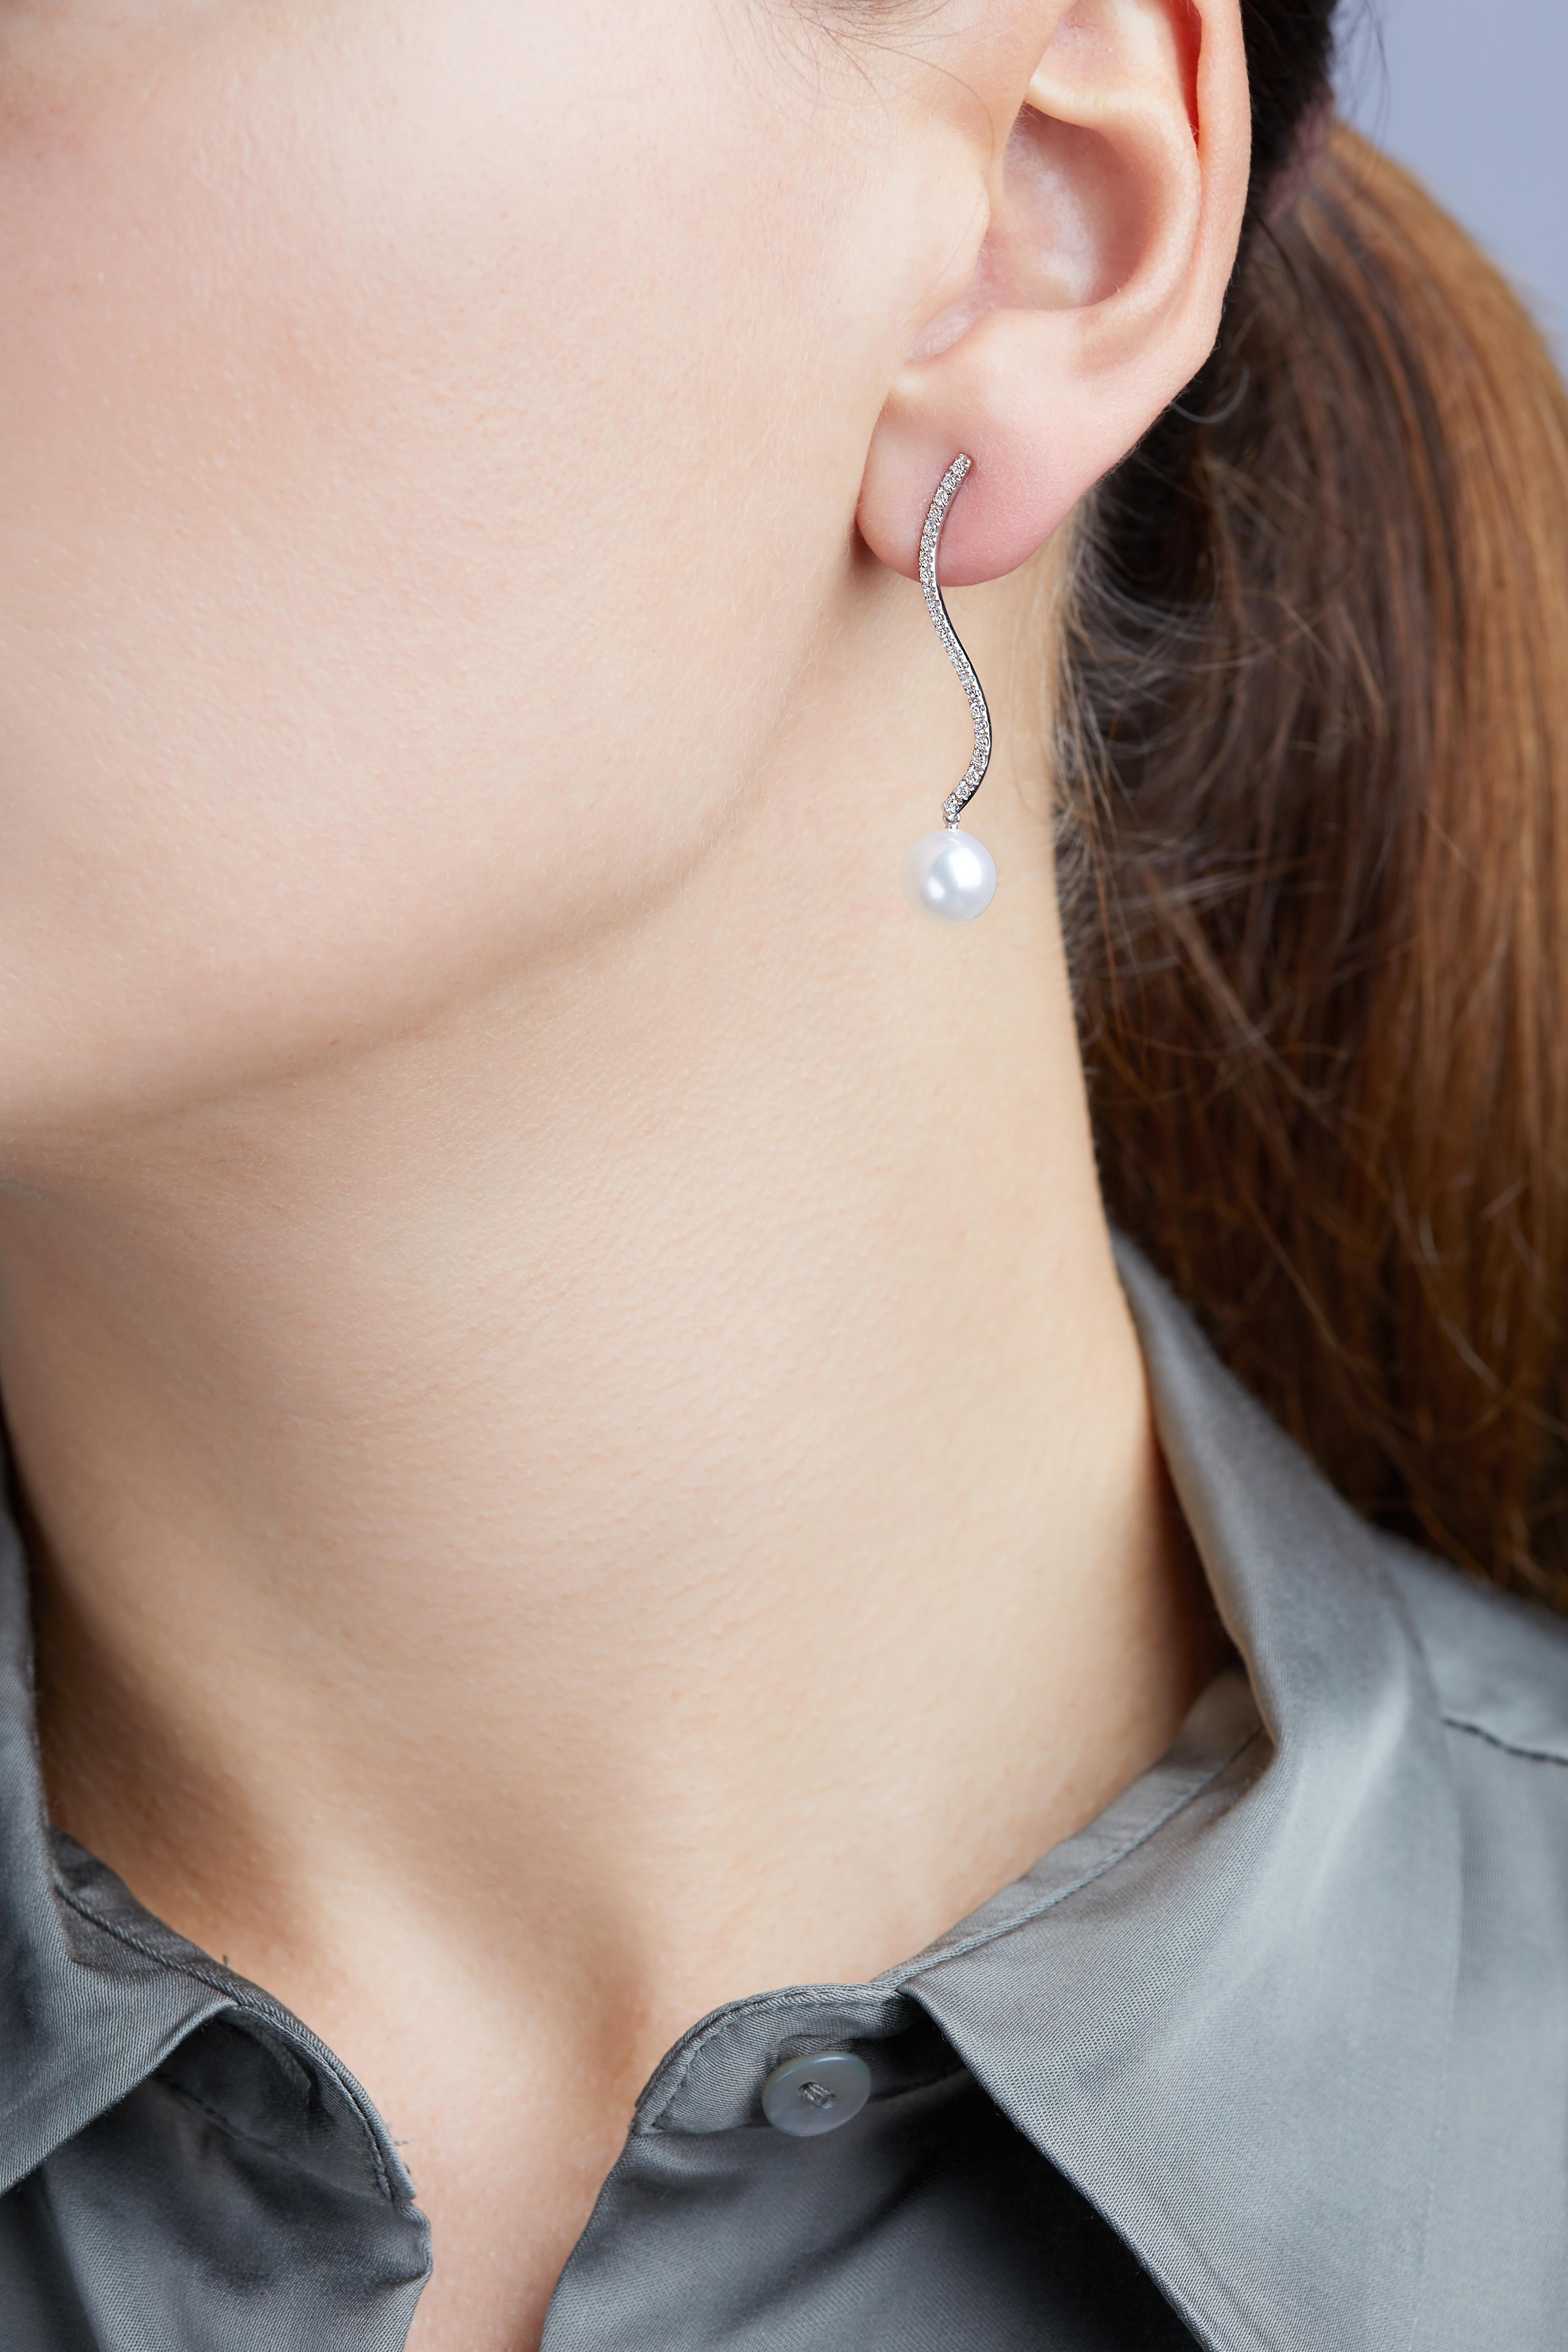 These elegant earrings by Yoko London feature lustrous Freshwater pearls beneath delicate diamond curves. Timeless and sophisticated, these earrings will add a touch of glamour to any outfit.

- 8.5-9mm Freshwater Pearl 
- 18k White Gold 
- 0.39cts